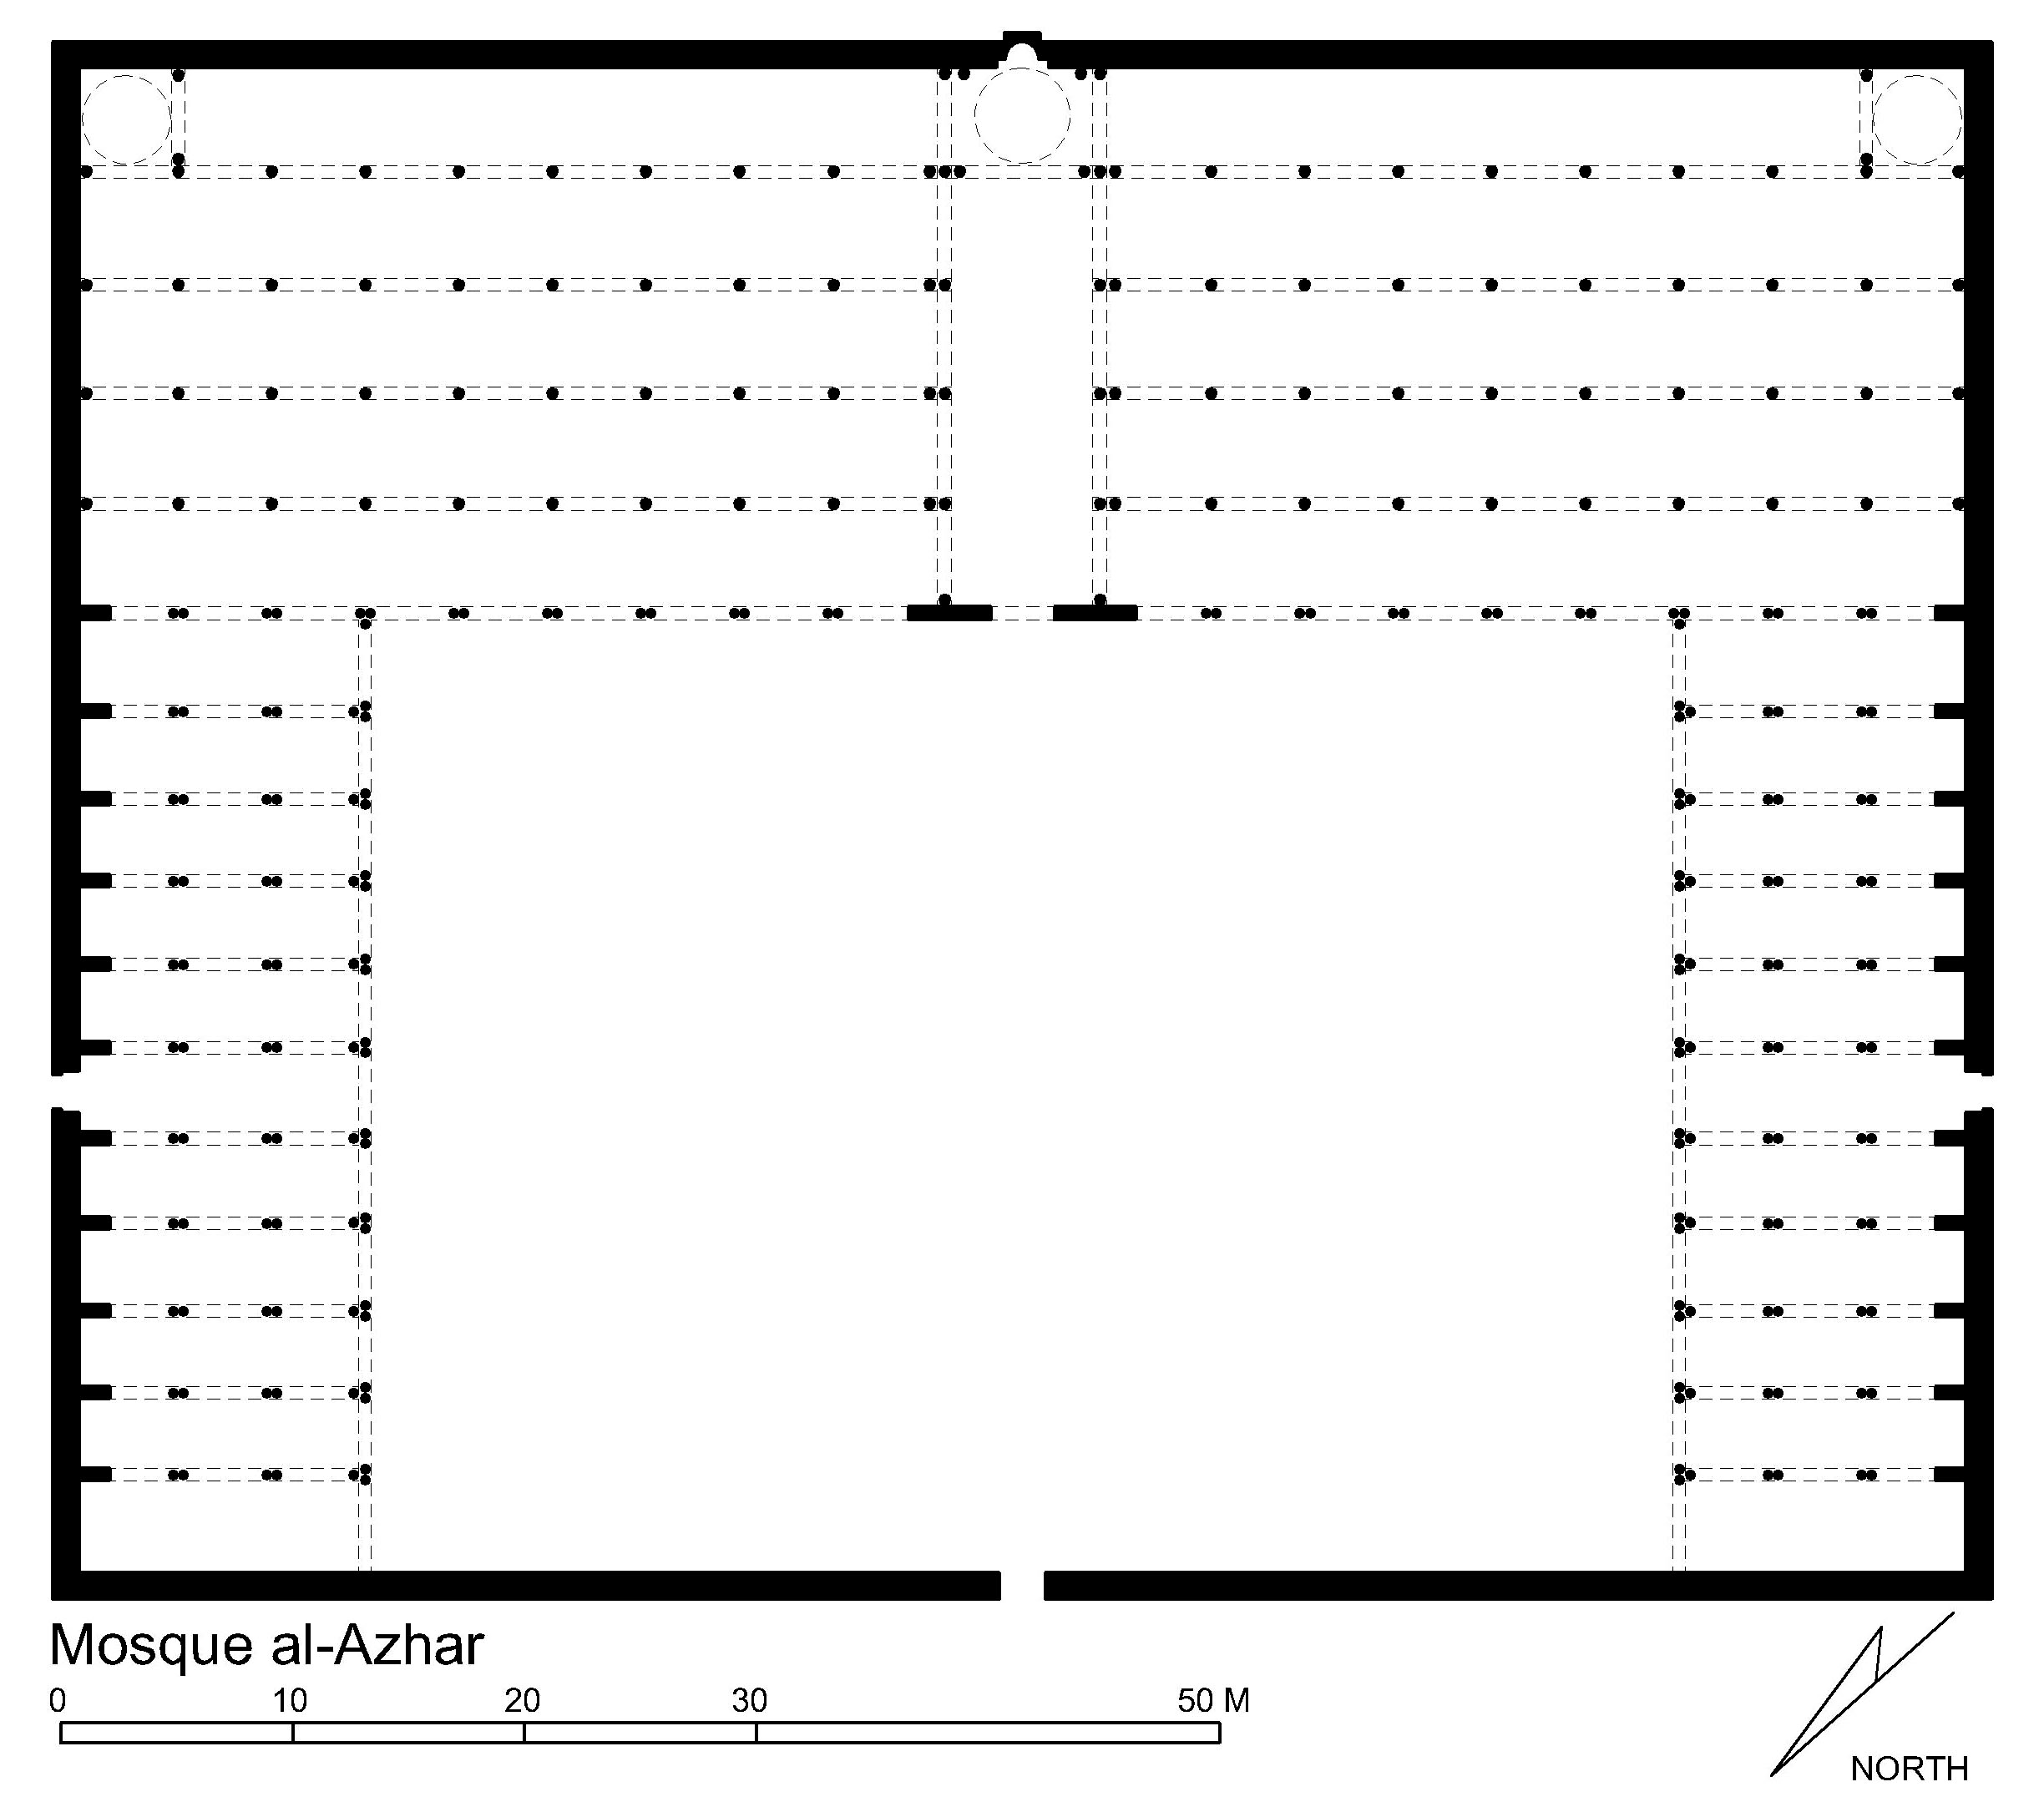 Jami' al-Azhar - Floor plan of mosque in AutoCAD 2000 format. Click the download button to download a zipped file containing the .dwg file. 